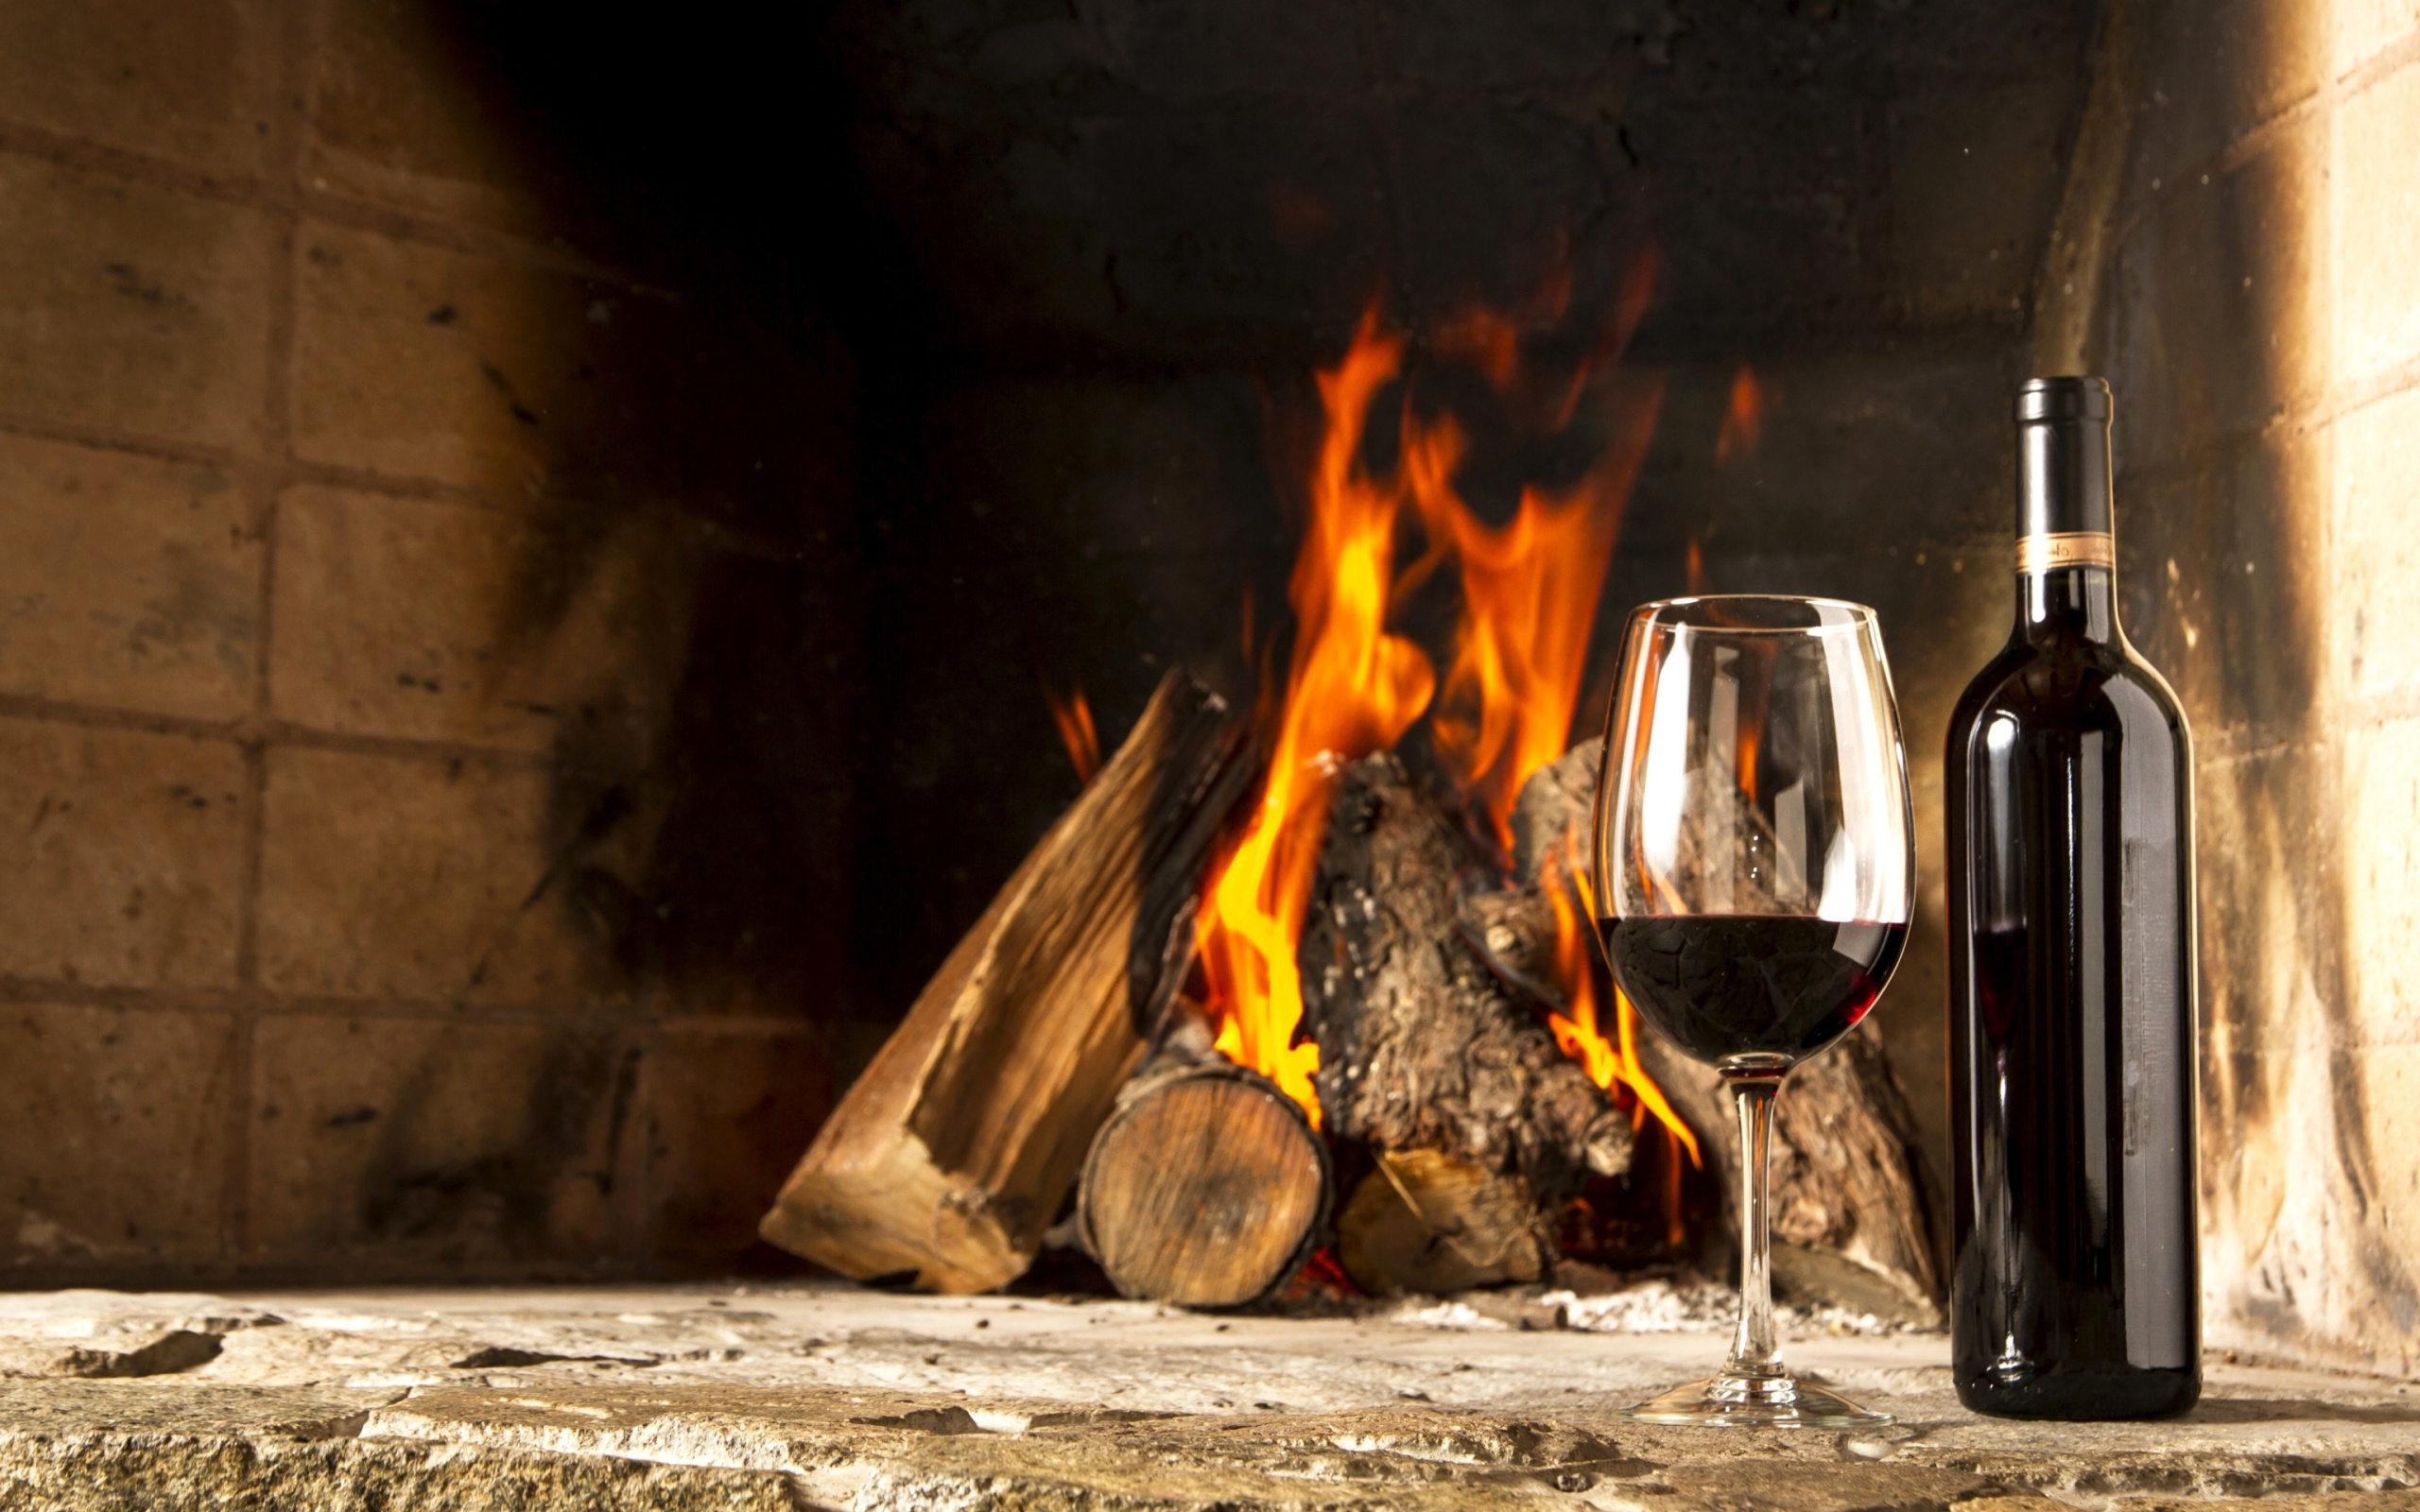 Wine and fireplace wallpaper 2560x1600